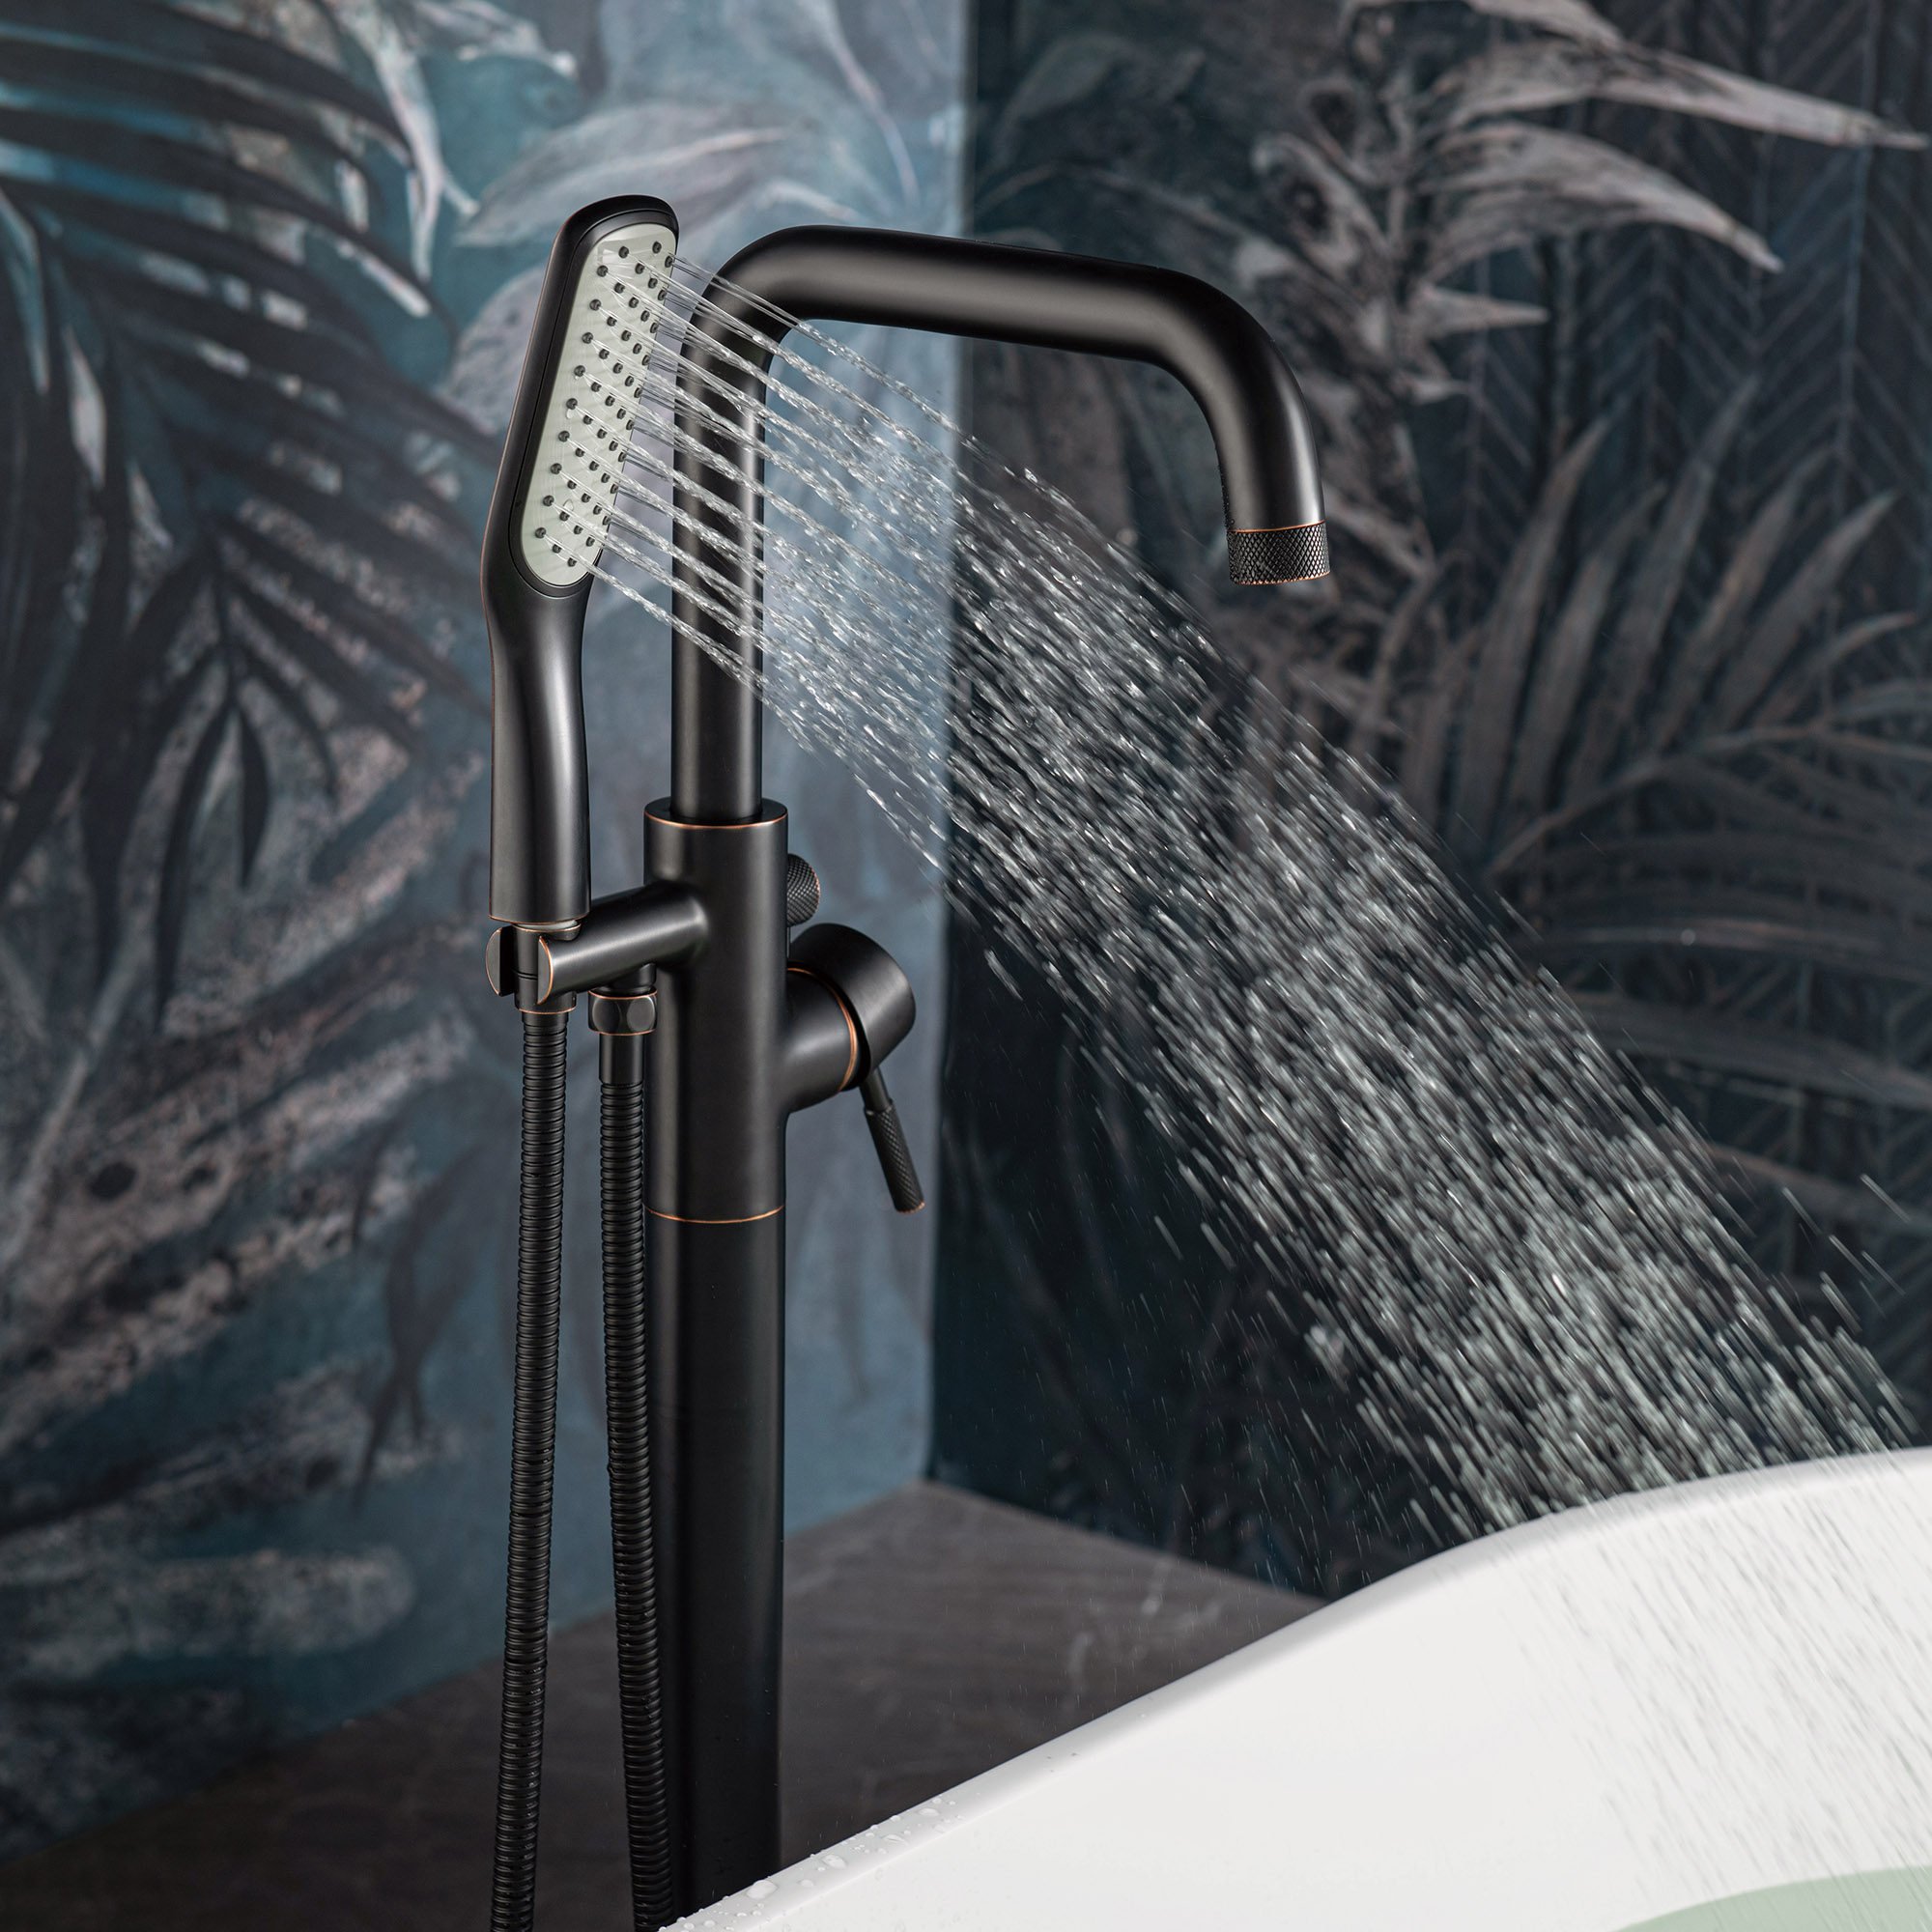  WOODBRIDGE F0074ORBSQ Fusion Single Handle Floor Mount Freestanding Tub Filler Faucet with Square Shape Hand Shower in Oil Rubbed Bronze Finish._14697